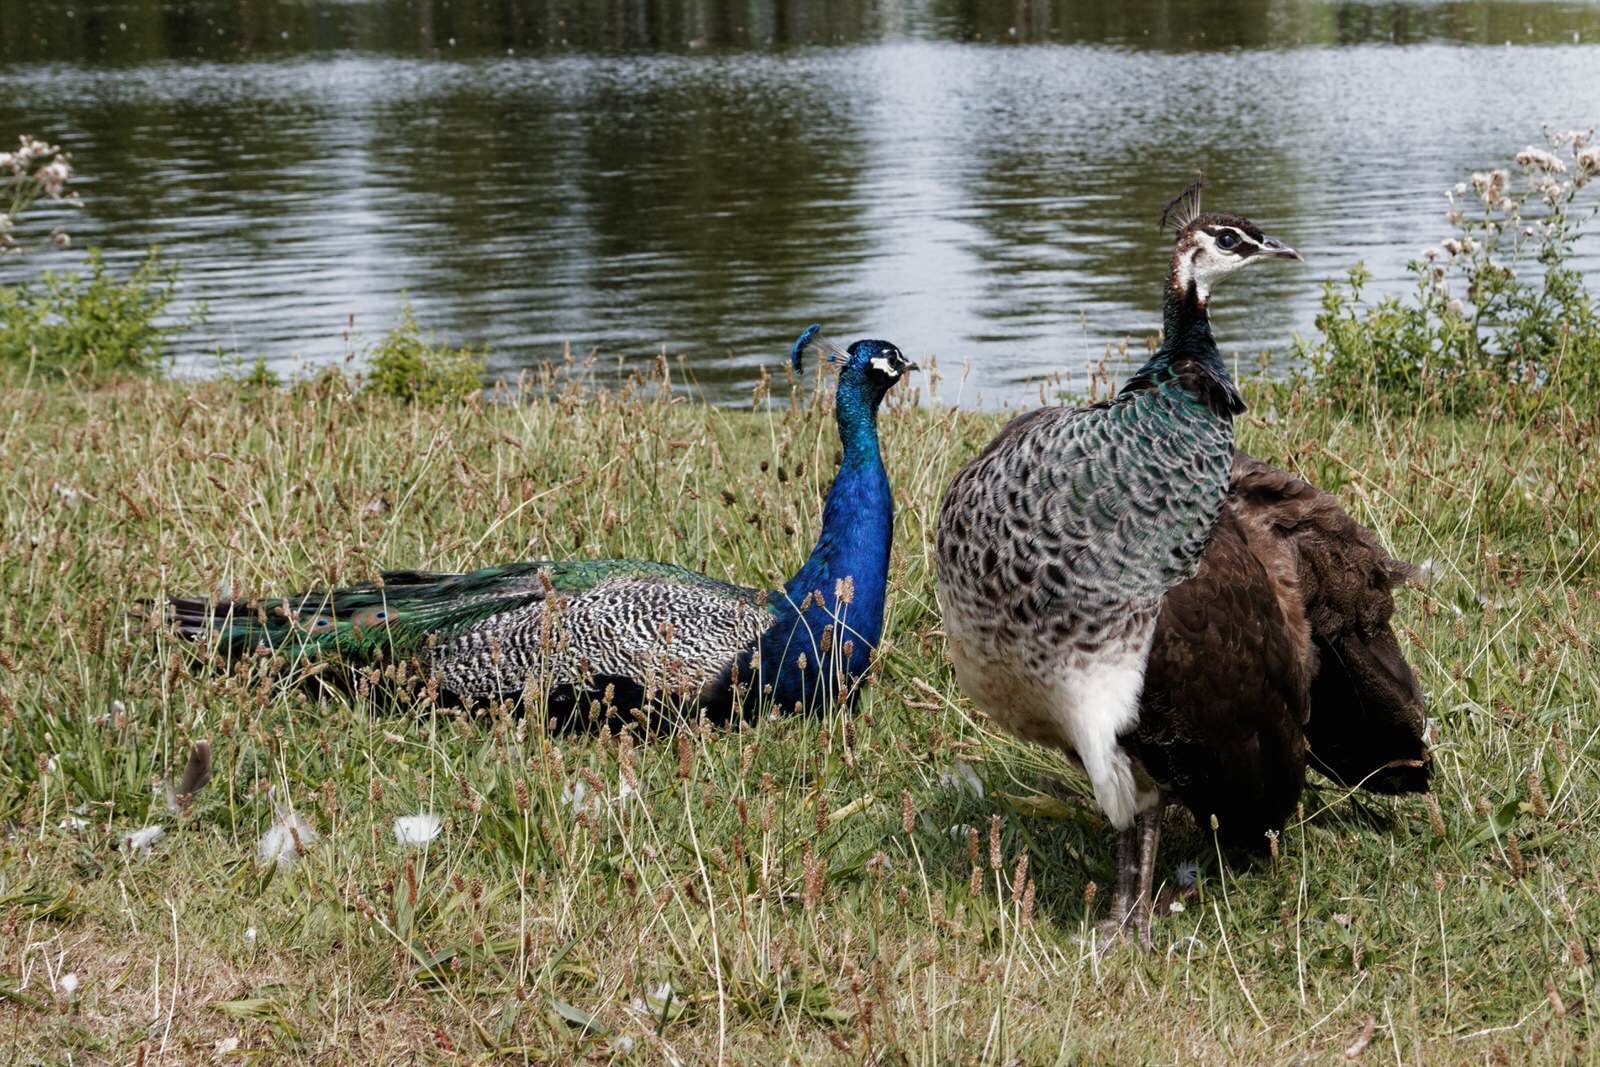 Female and Male Peacocks in Paris